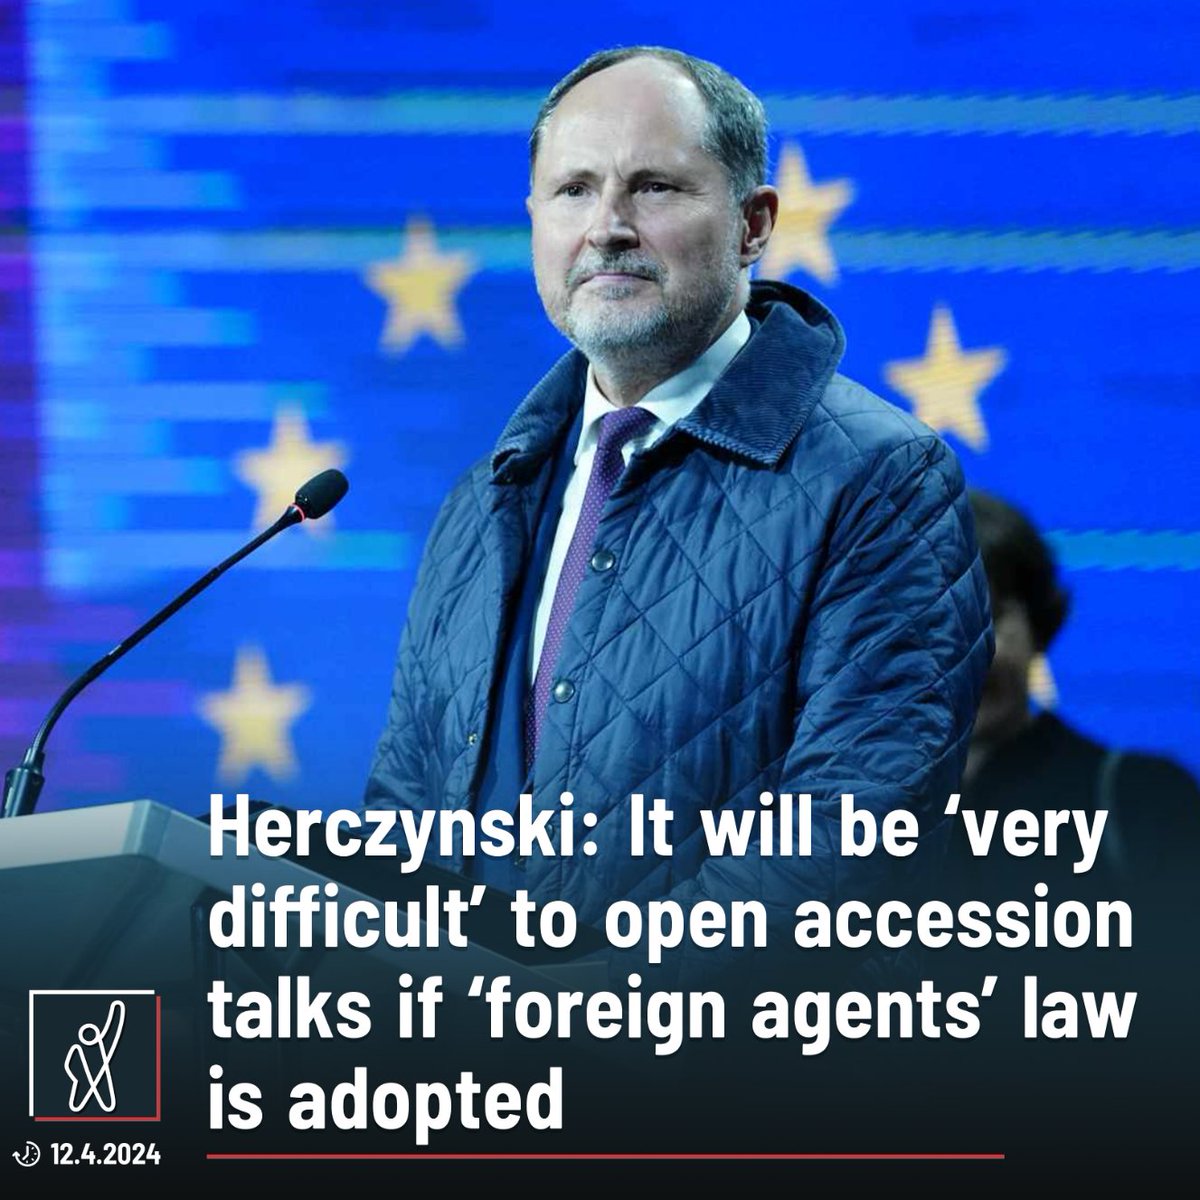 “This draft law is incompatible with European norms and European values, and especially in the current context, it will be very difficult for the European Commission to make a positive assessment if this law is adopted,” EU ambassador to Georgia, Paweł Herczynski said.